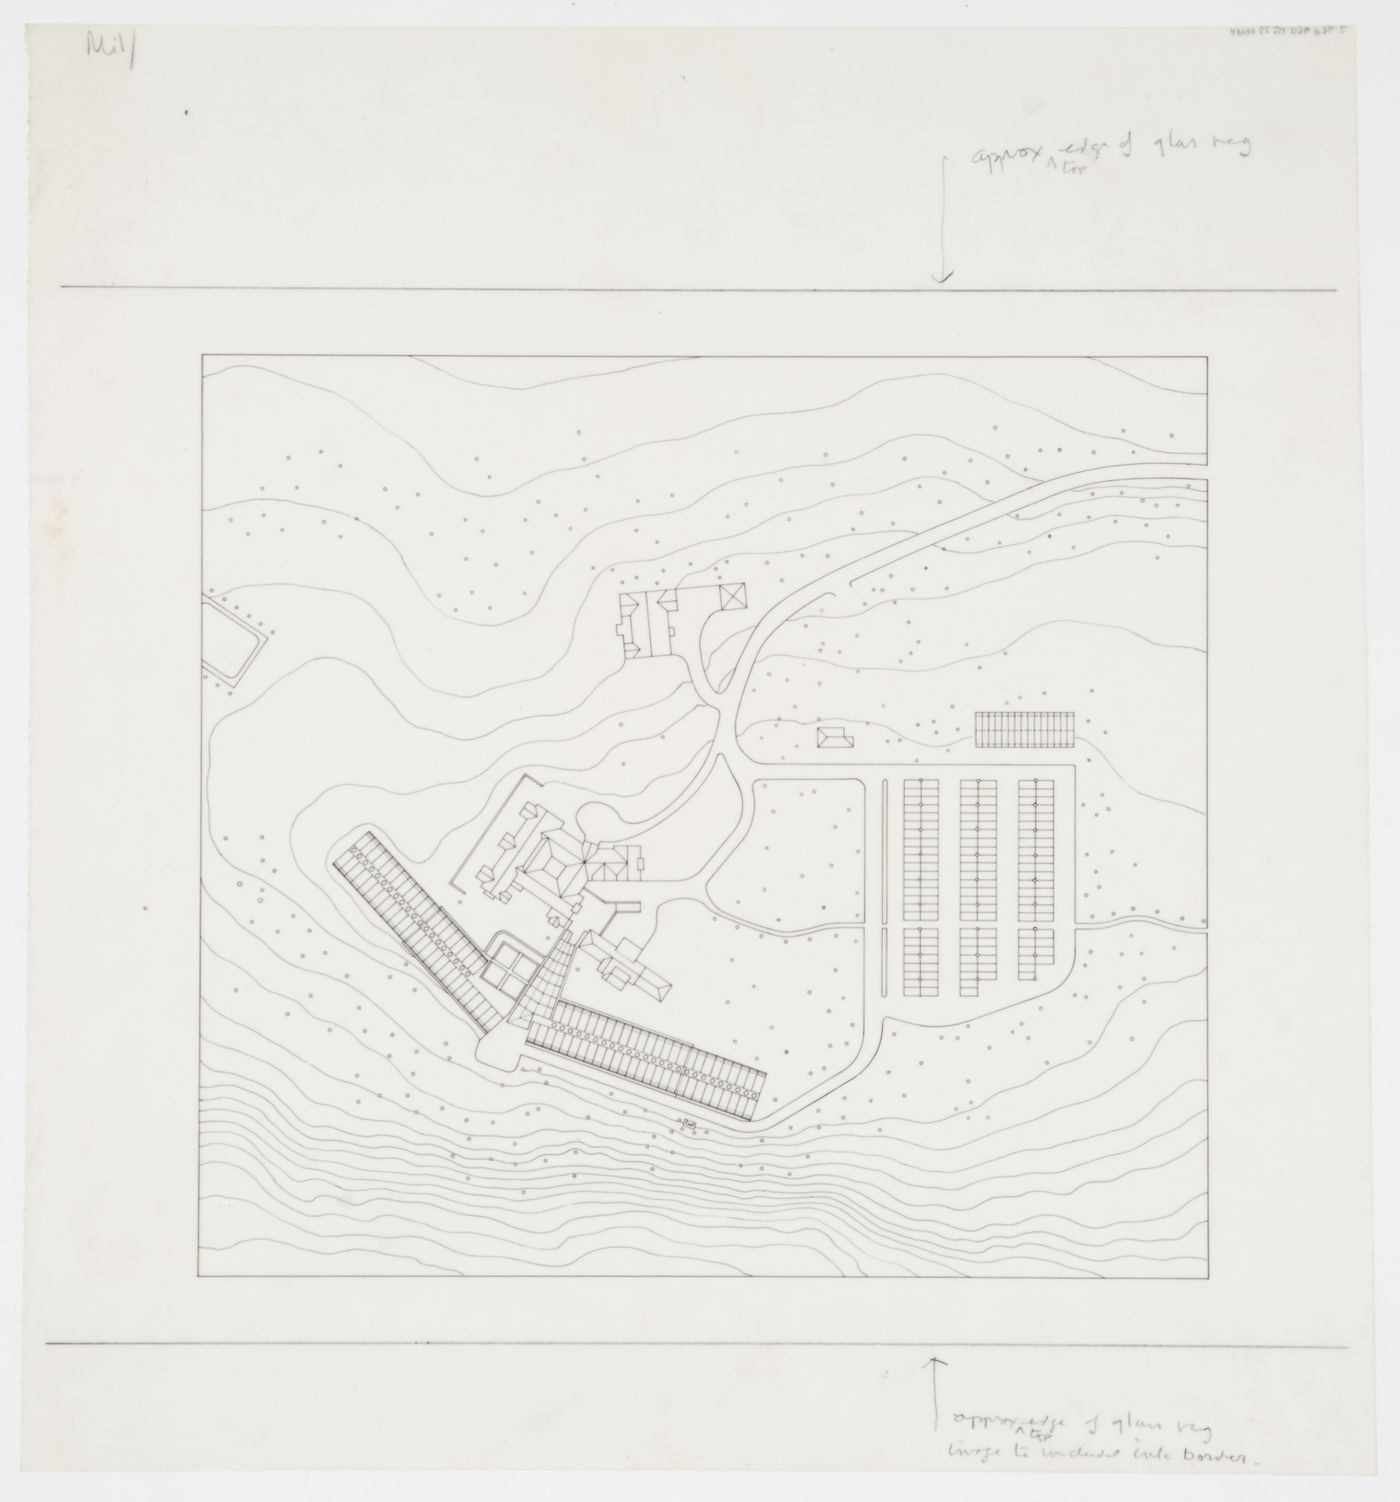 Olivetti Training Centre, Haslemere, England: site plan